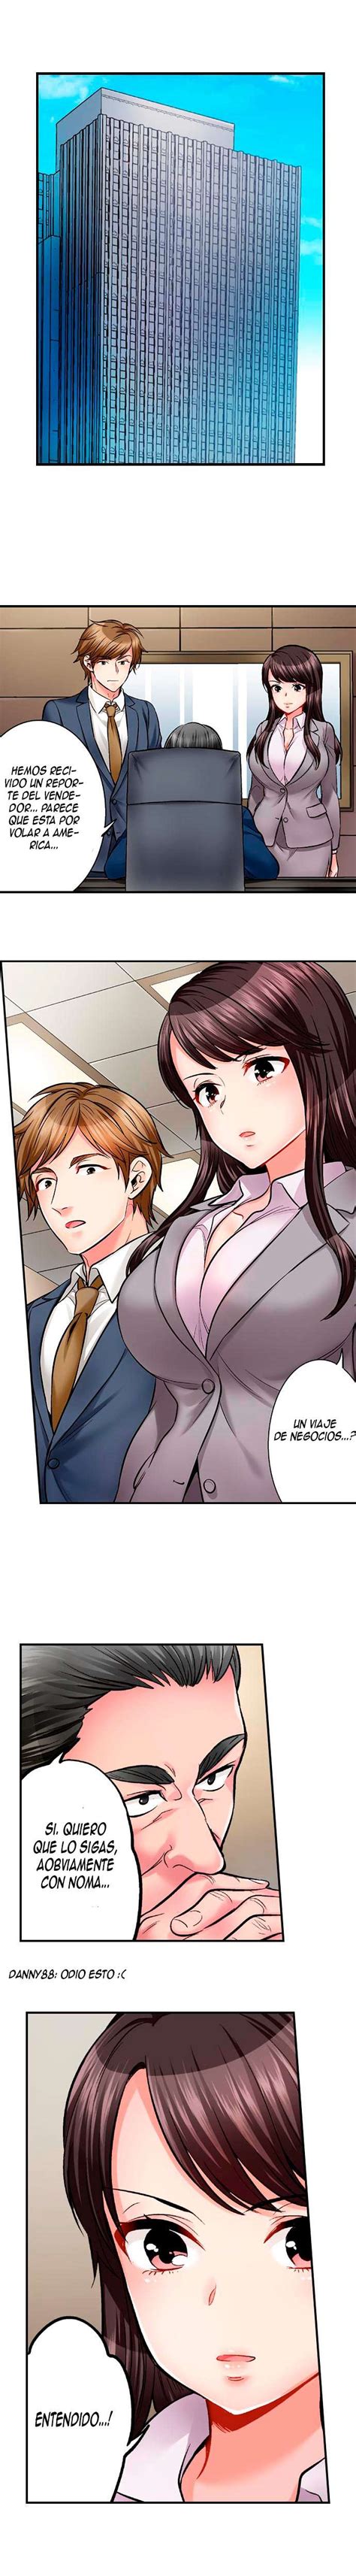 Sex Is Part Of Undercover Agent S Job Cap Tulo Manhua Dragontranslation Net